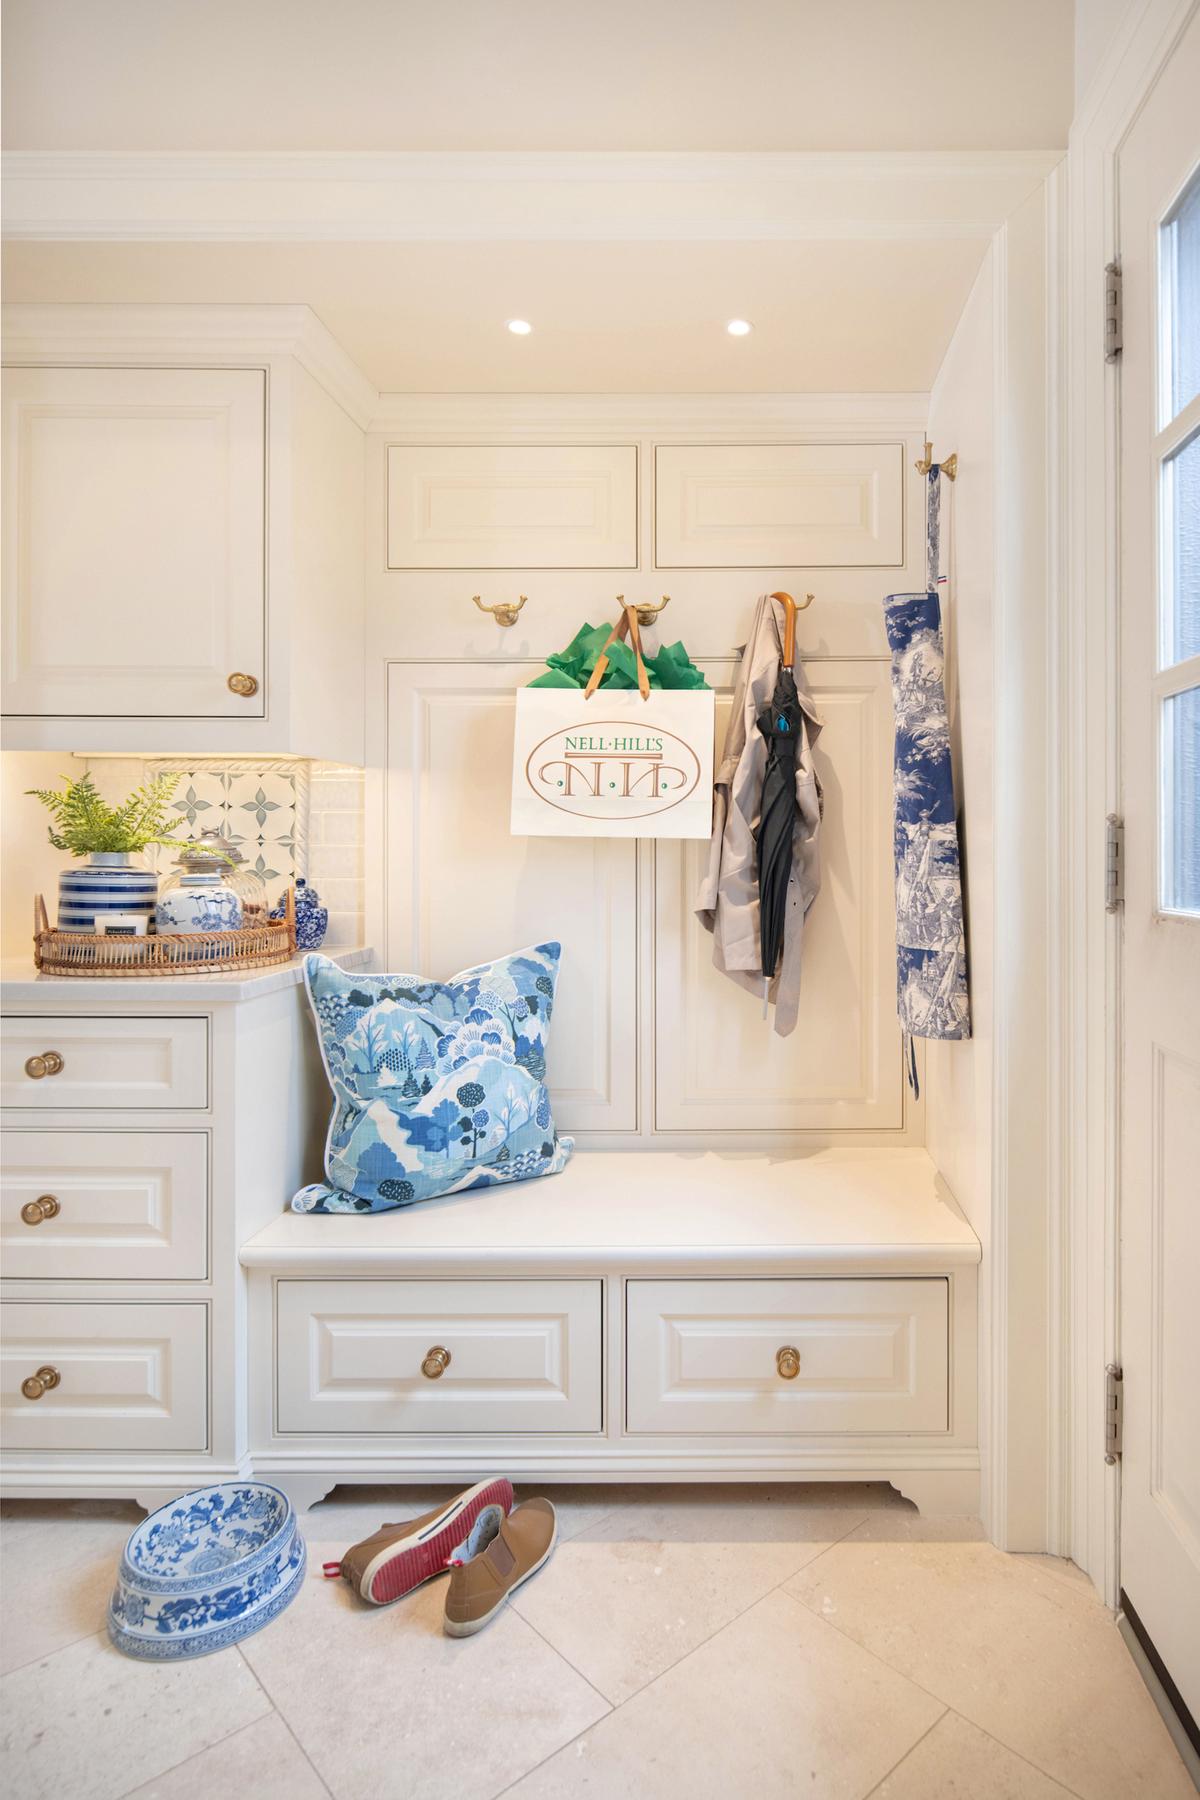 The mudroom, off the kitchen, is dressed in cheery blues. (Handout/TNS)